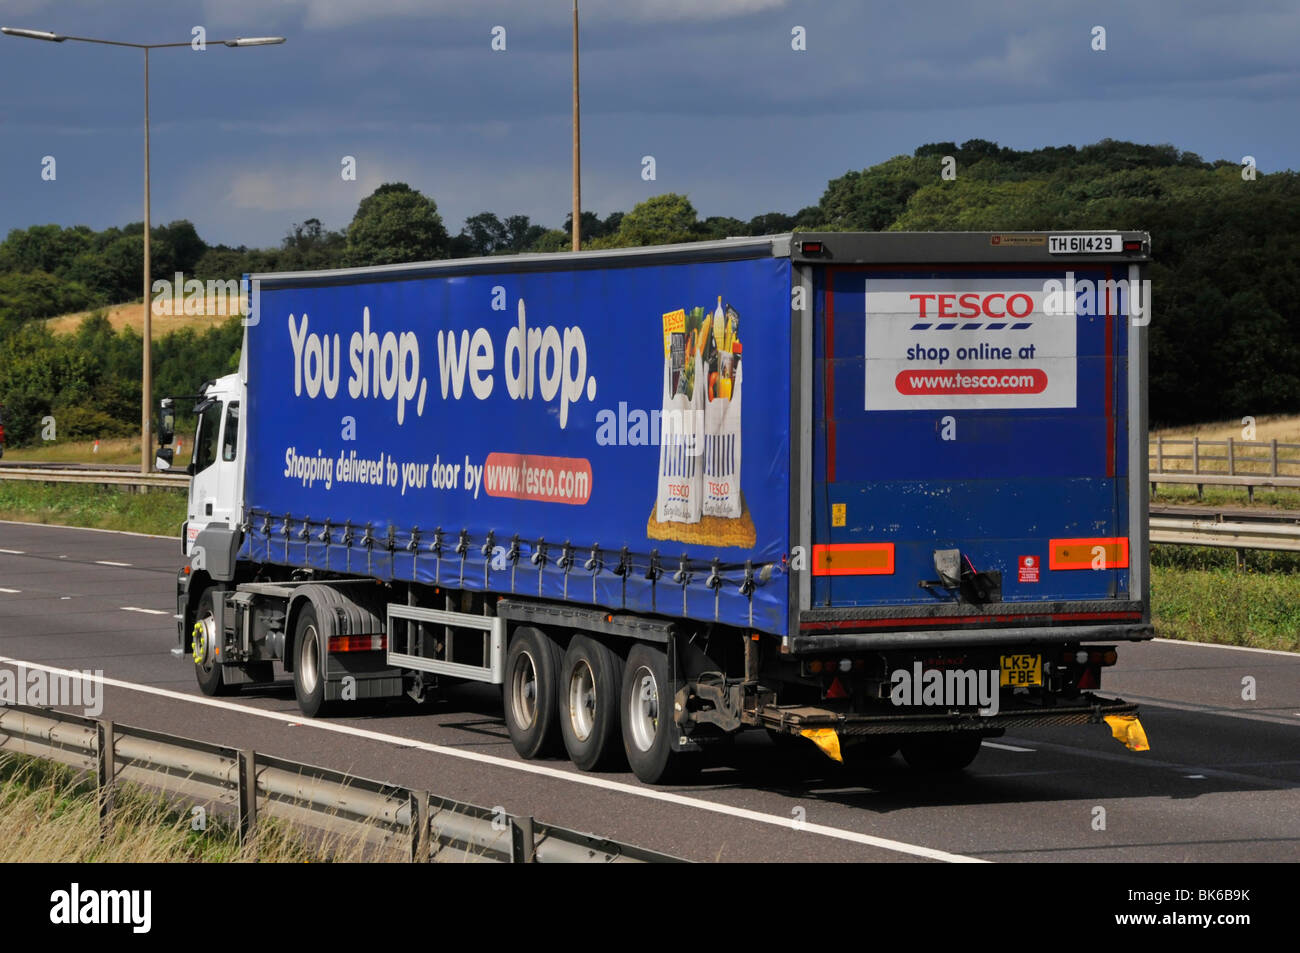 Side view hgv supermarket food supply chain store grocery delivery lorry truck with trailer advertising Tesco food business driving on UK motorway Stock Photo